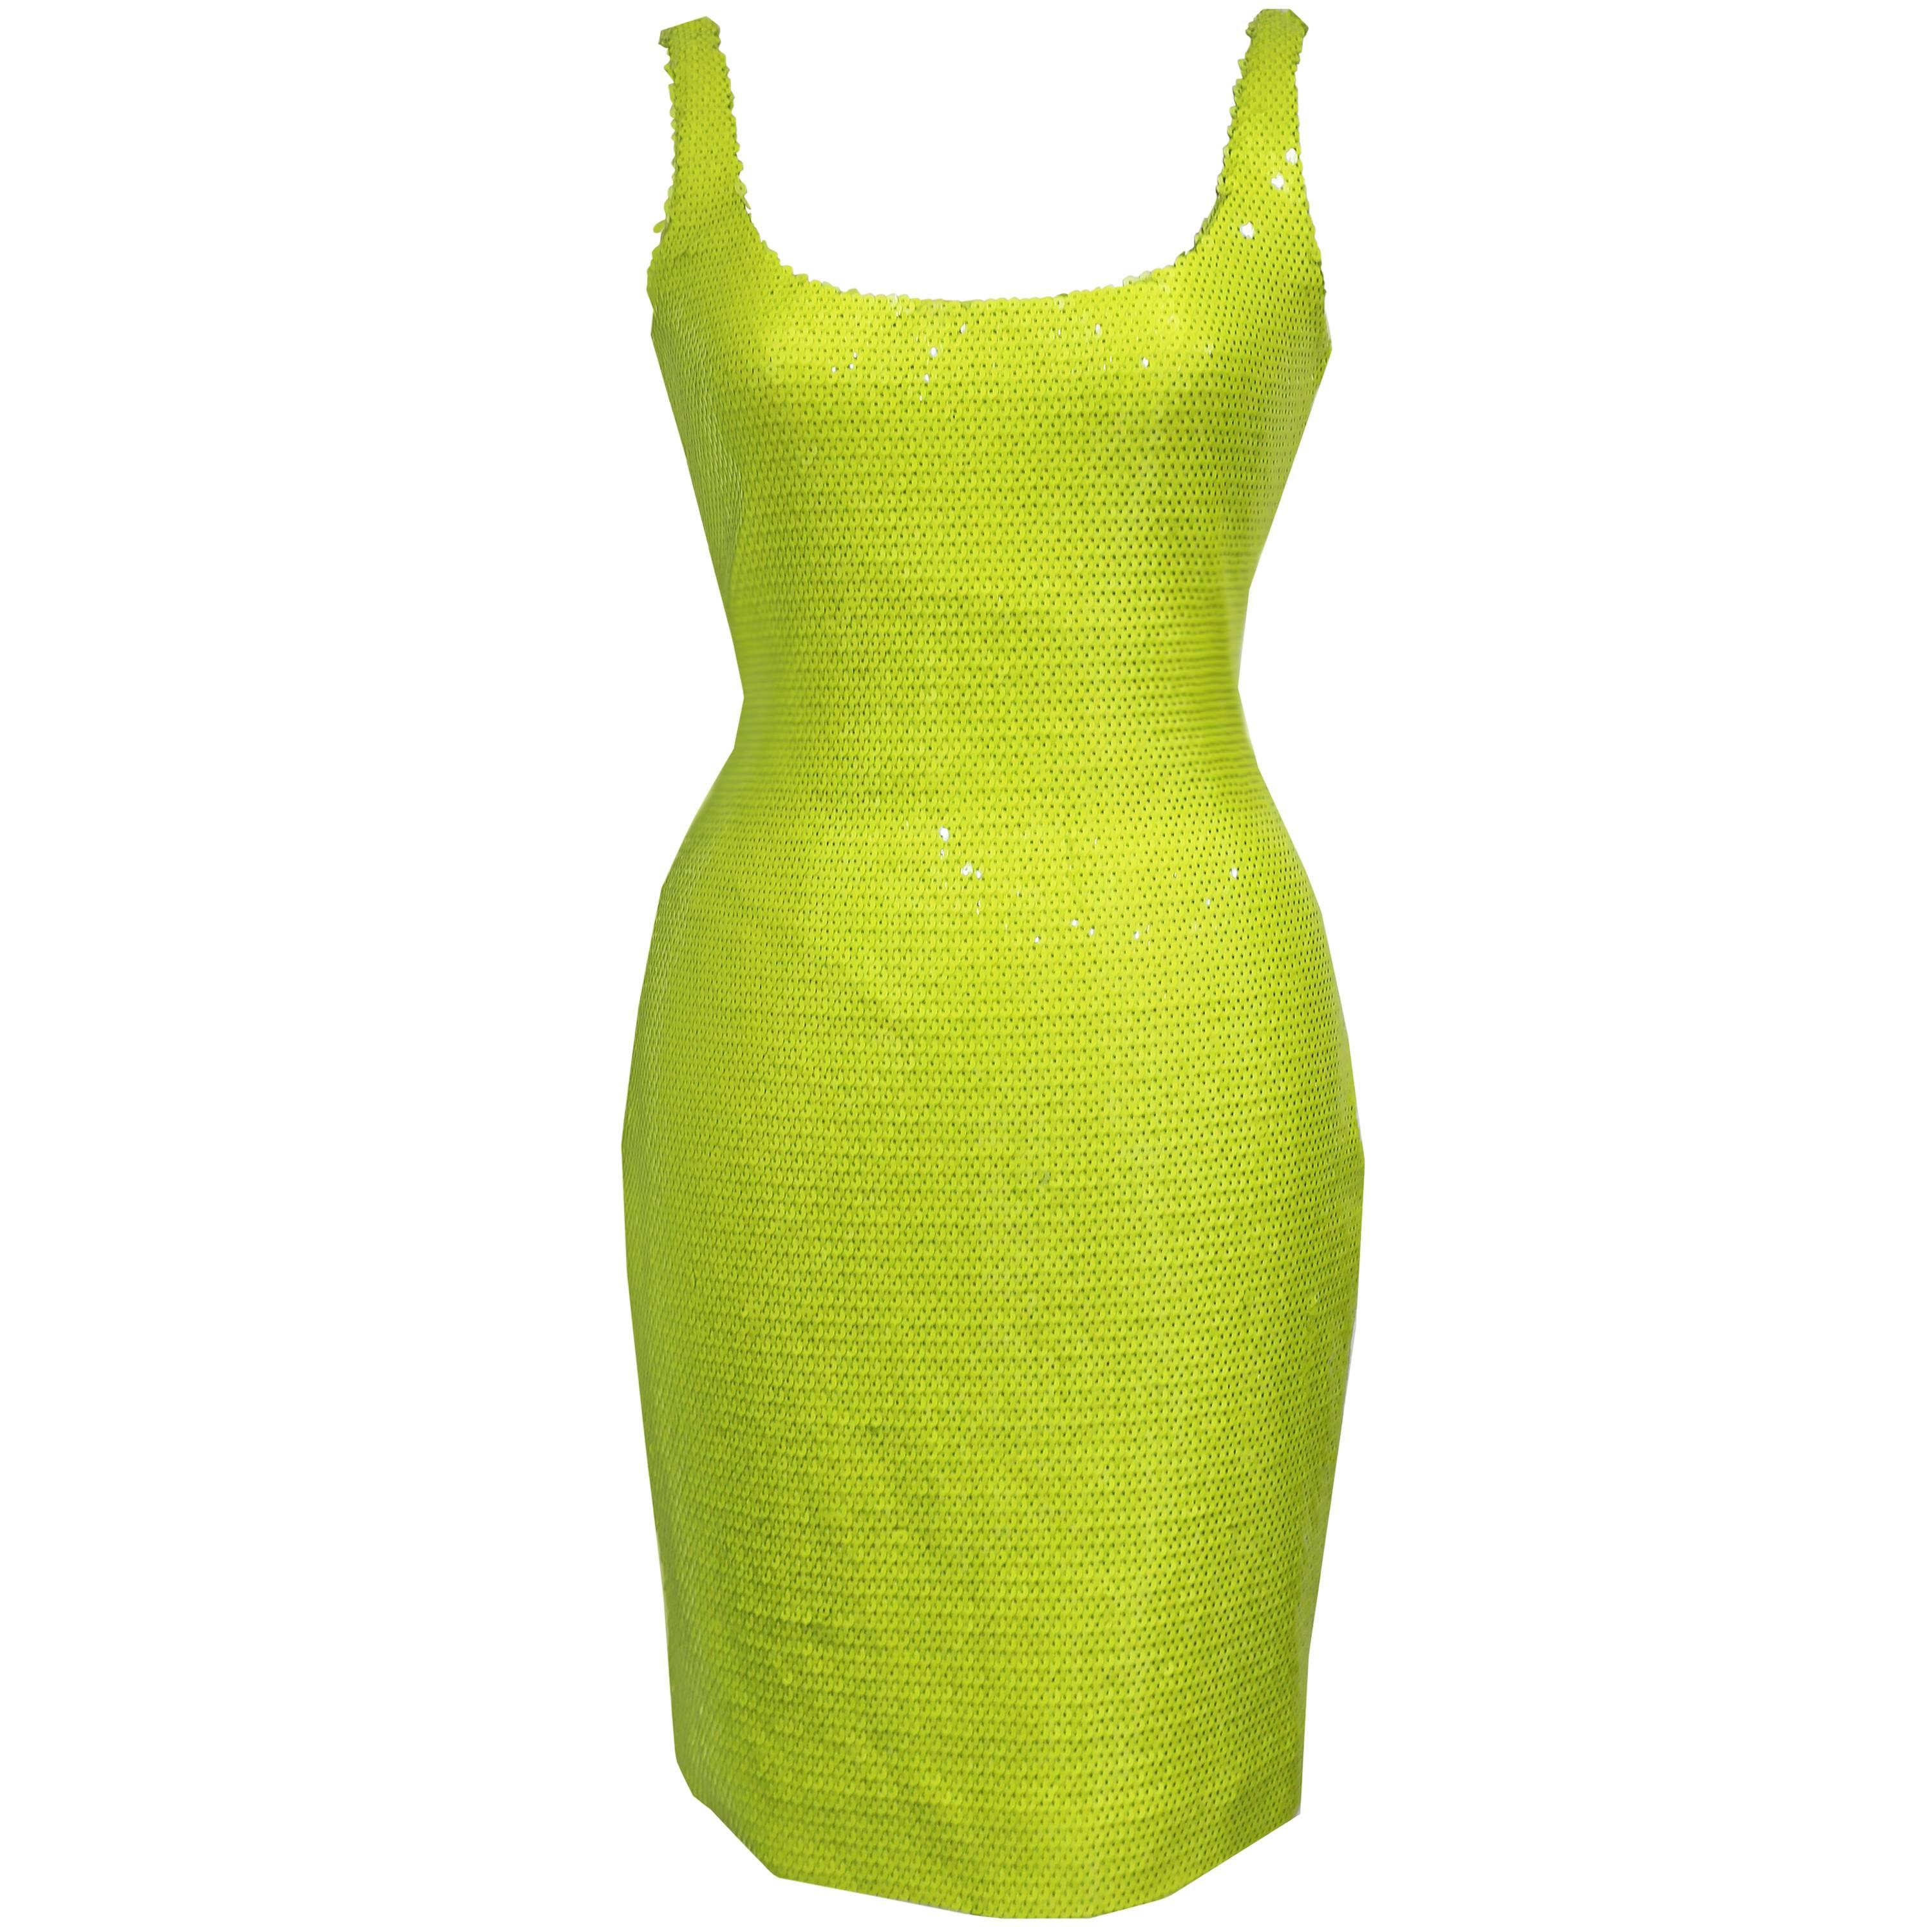 Stephen Sprouse bombshell bodycon sequinned neon yellow evening dress, c. 1980s